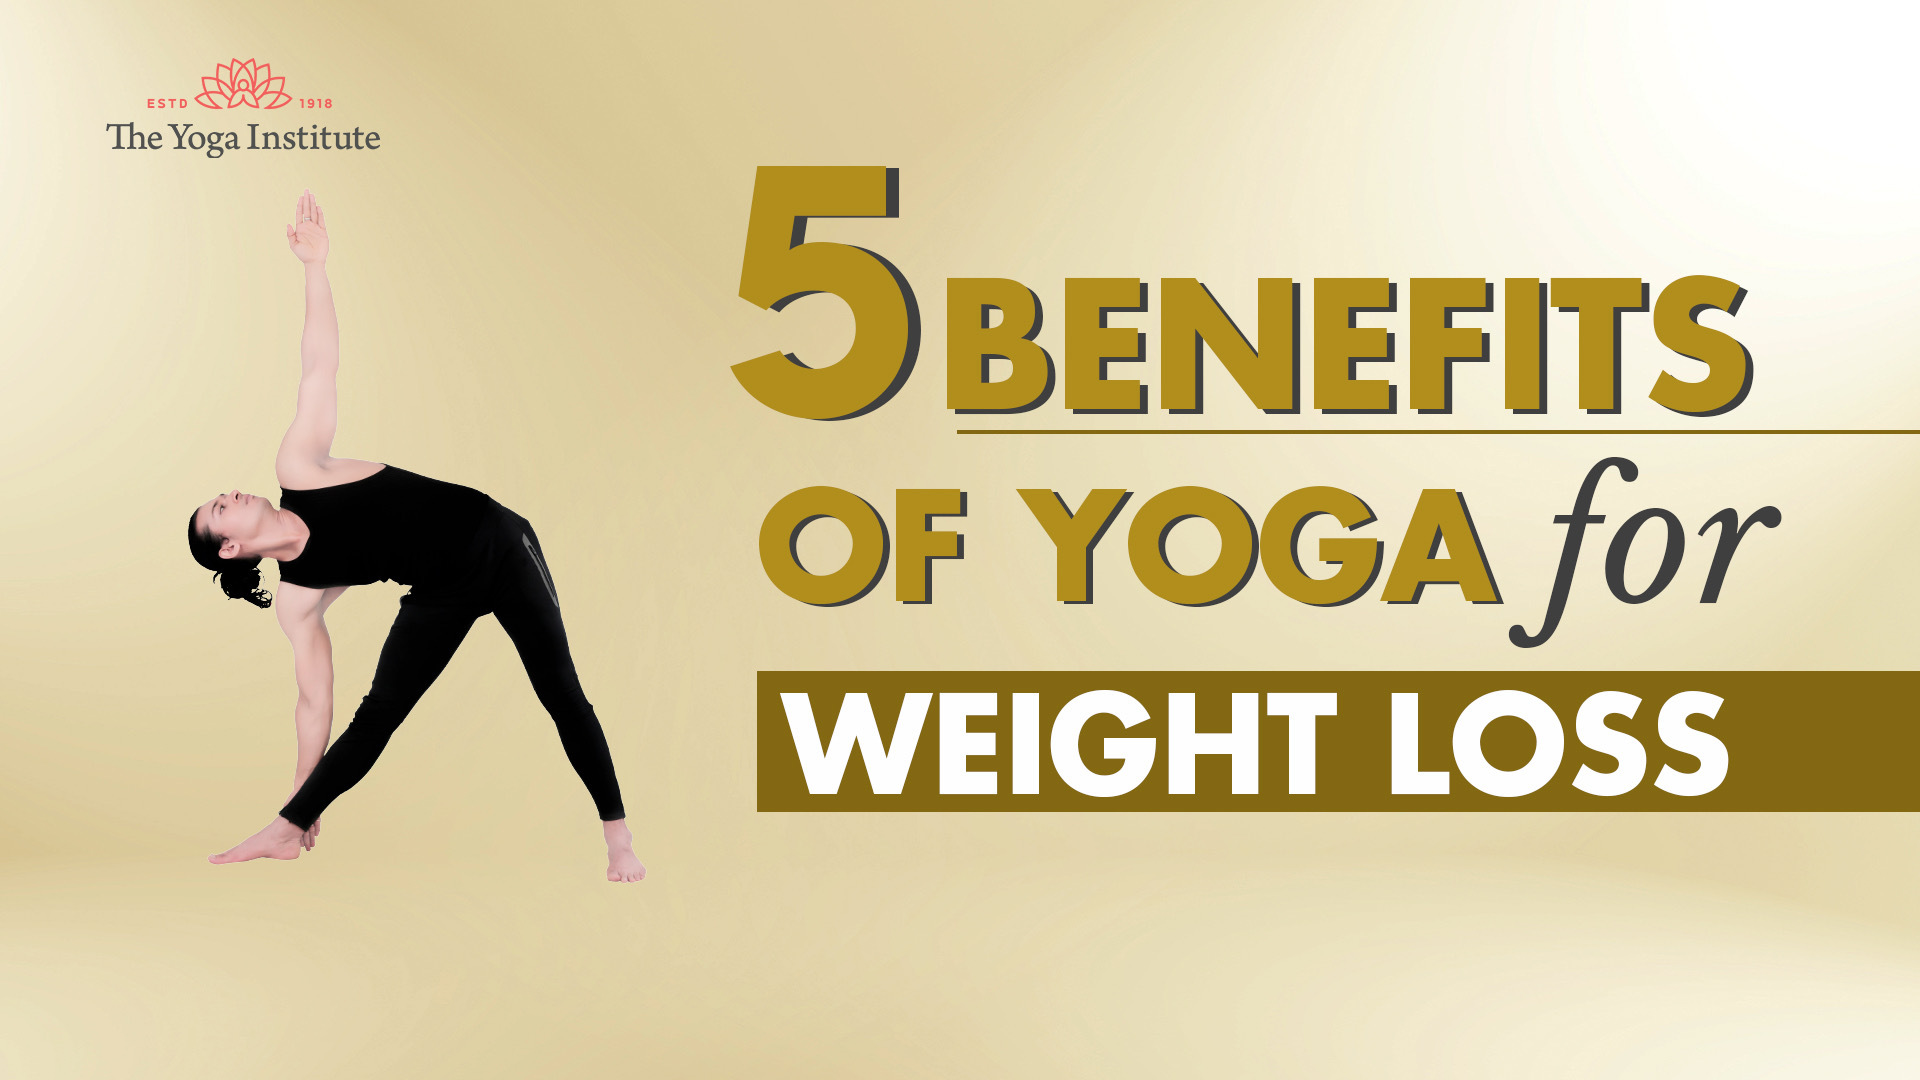 Benefits of Yoga | Yoga Postures for Weight Loss(Fat Loss)